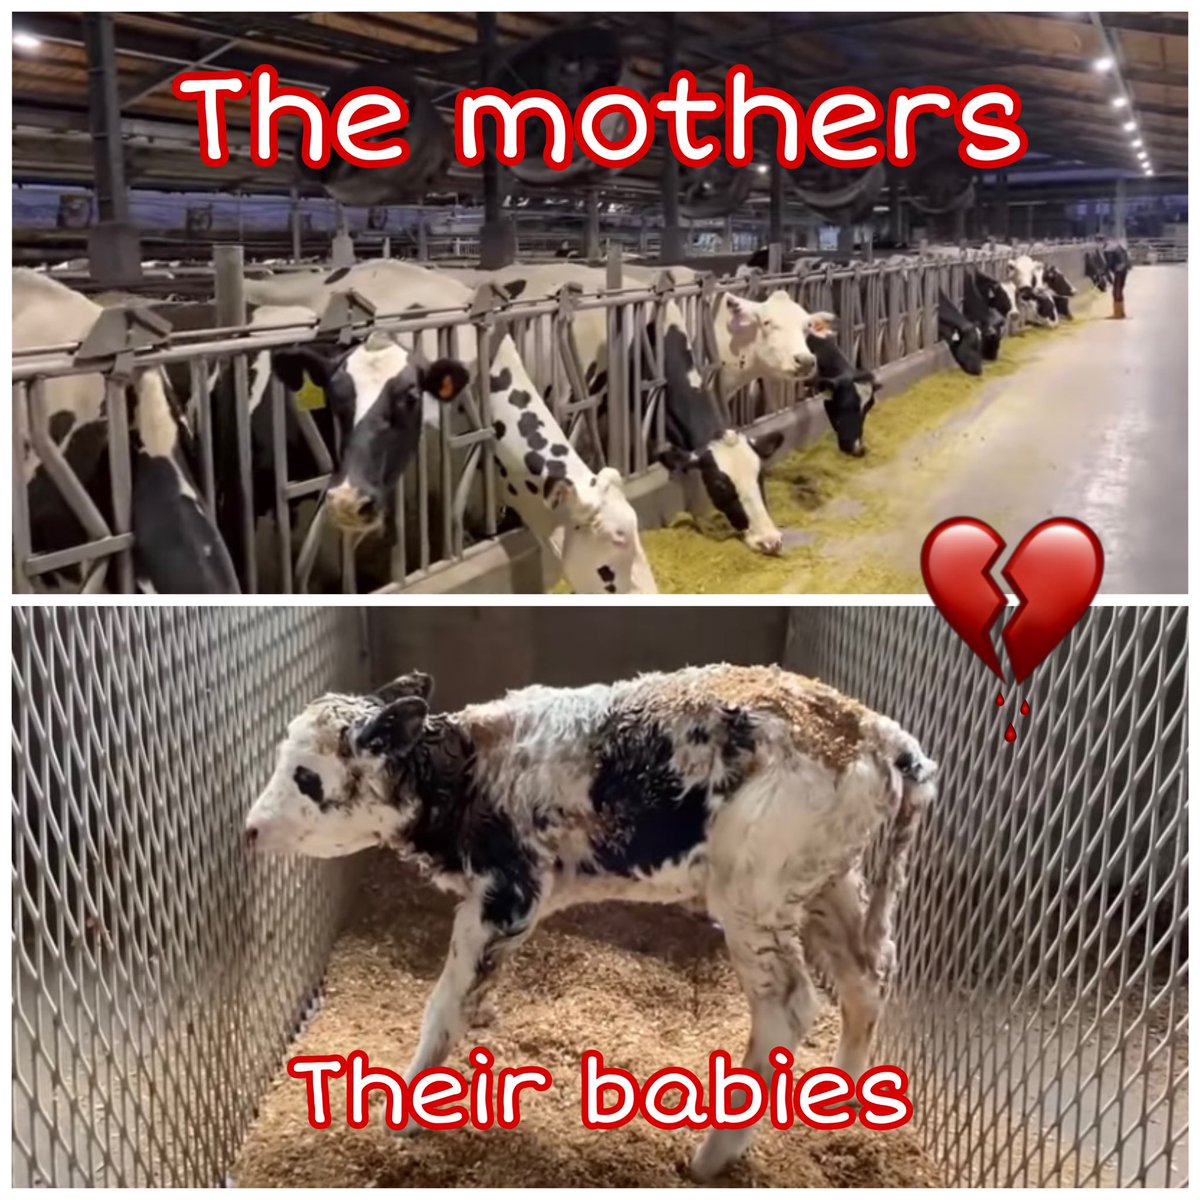 #stopfactoryfarming #freedom 
#EndTheCageAge #ClimateEmergency 
#ThisIsDairy 
The only ones paying the real price for milk are the cows and their babies , think before you buy 🙏🏻 #TryVegan try respect….